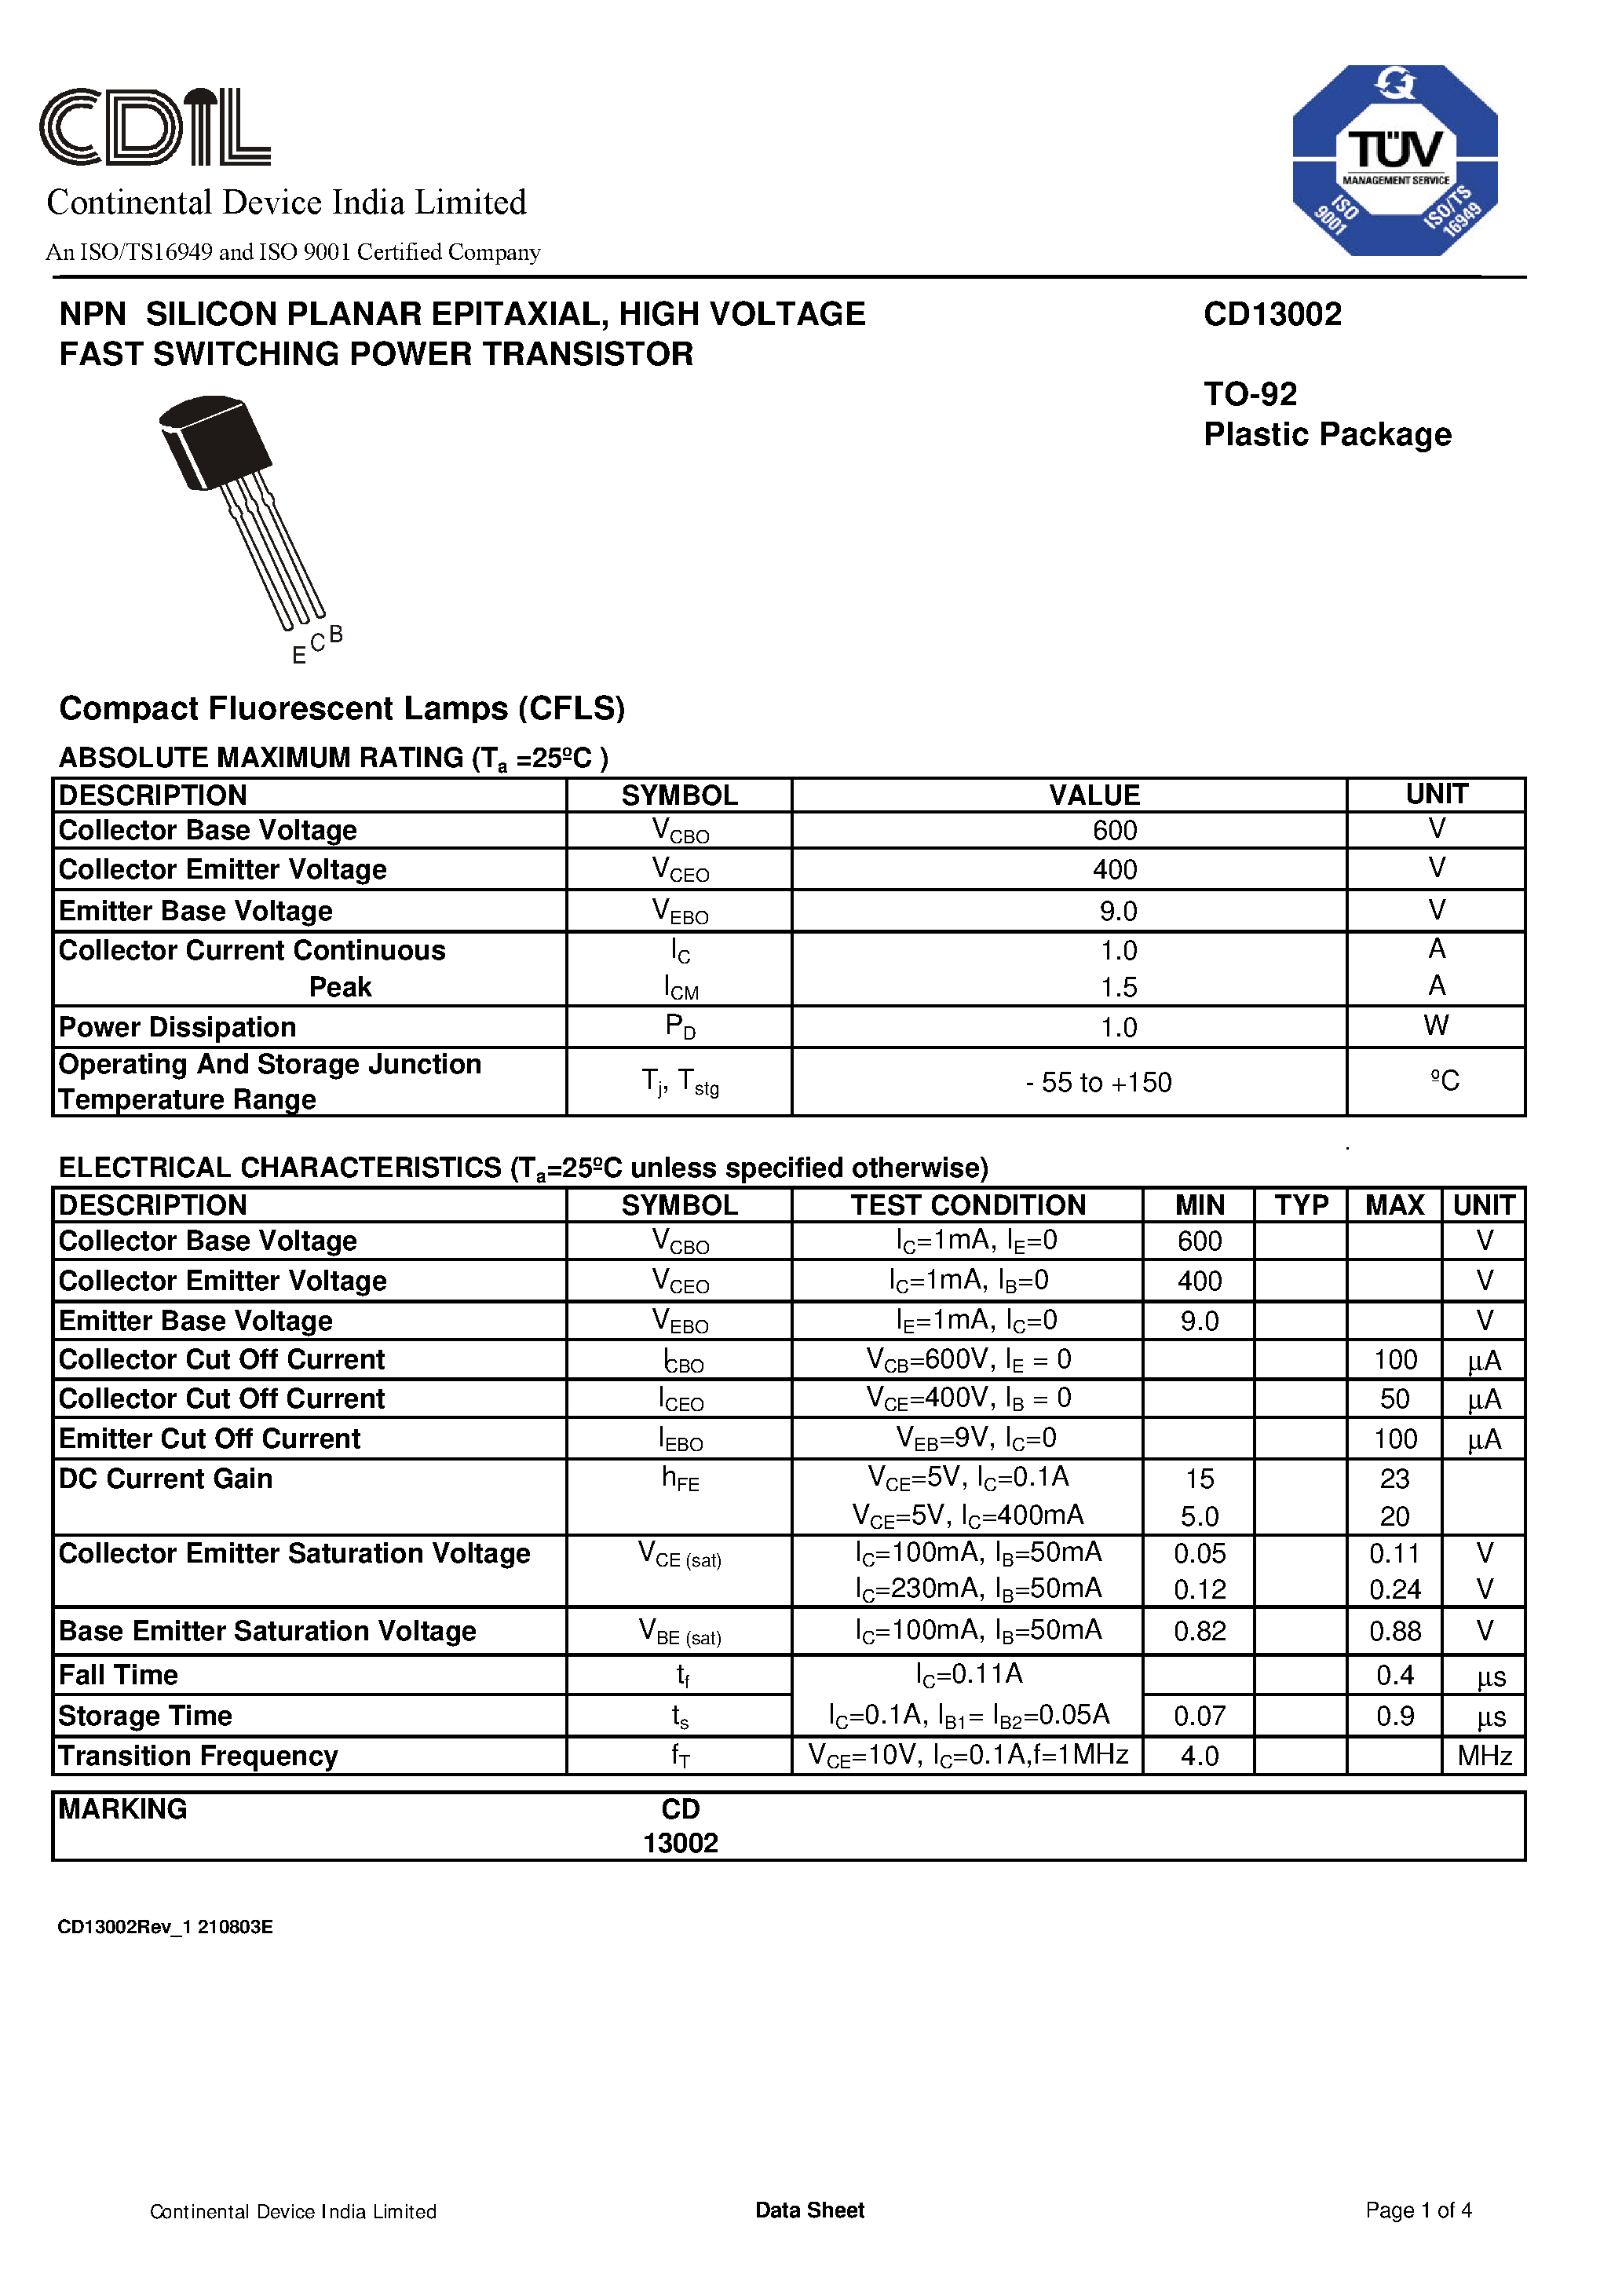 Datasheet CD13002 - NPN SILICON PLANAR EPITAXIAL / HIGH VOLTAGE FAST SWITCHING POWER TRANSISTOR page 1